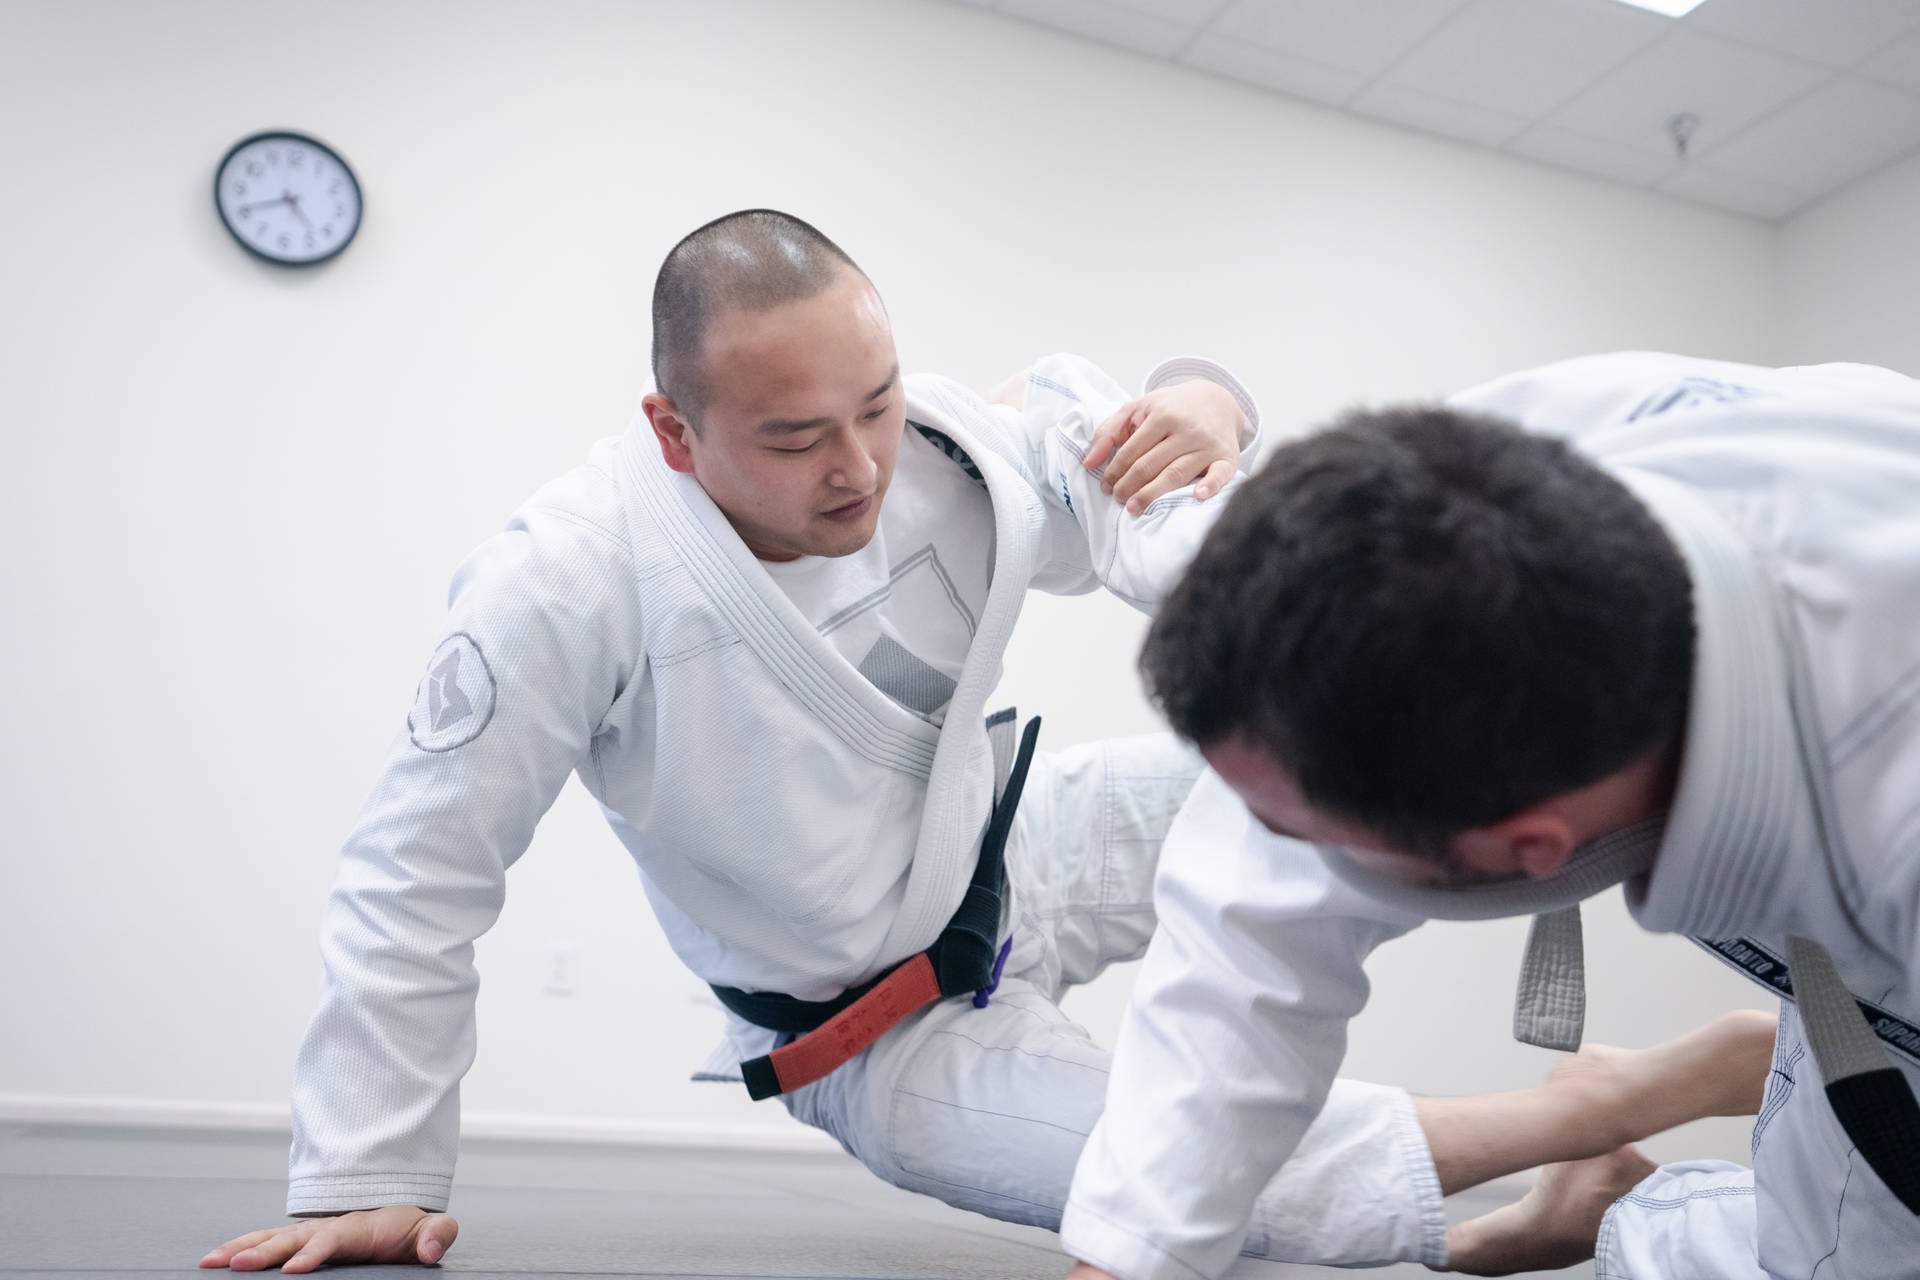 Judo Coach And Student